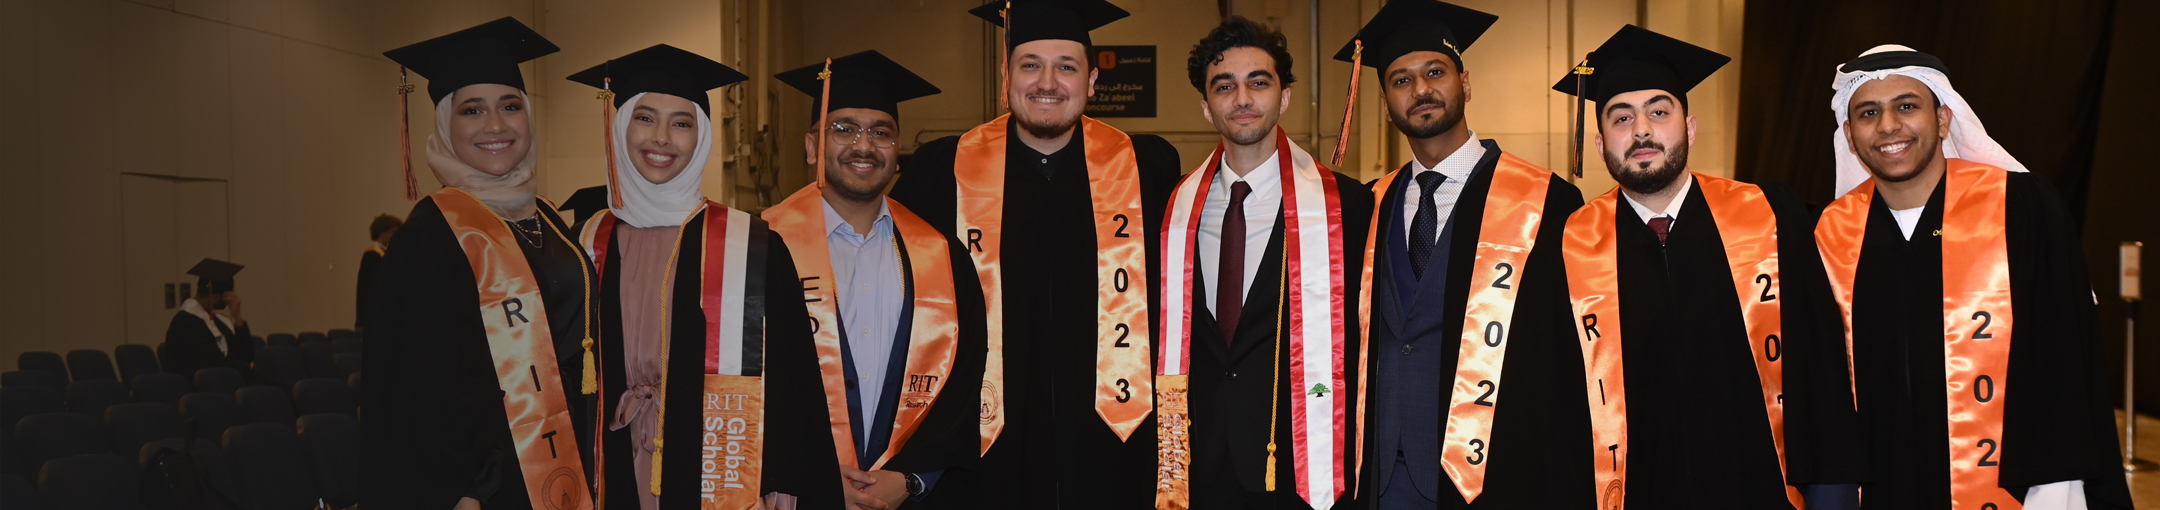 A group of RIT graduates posing for a picture